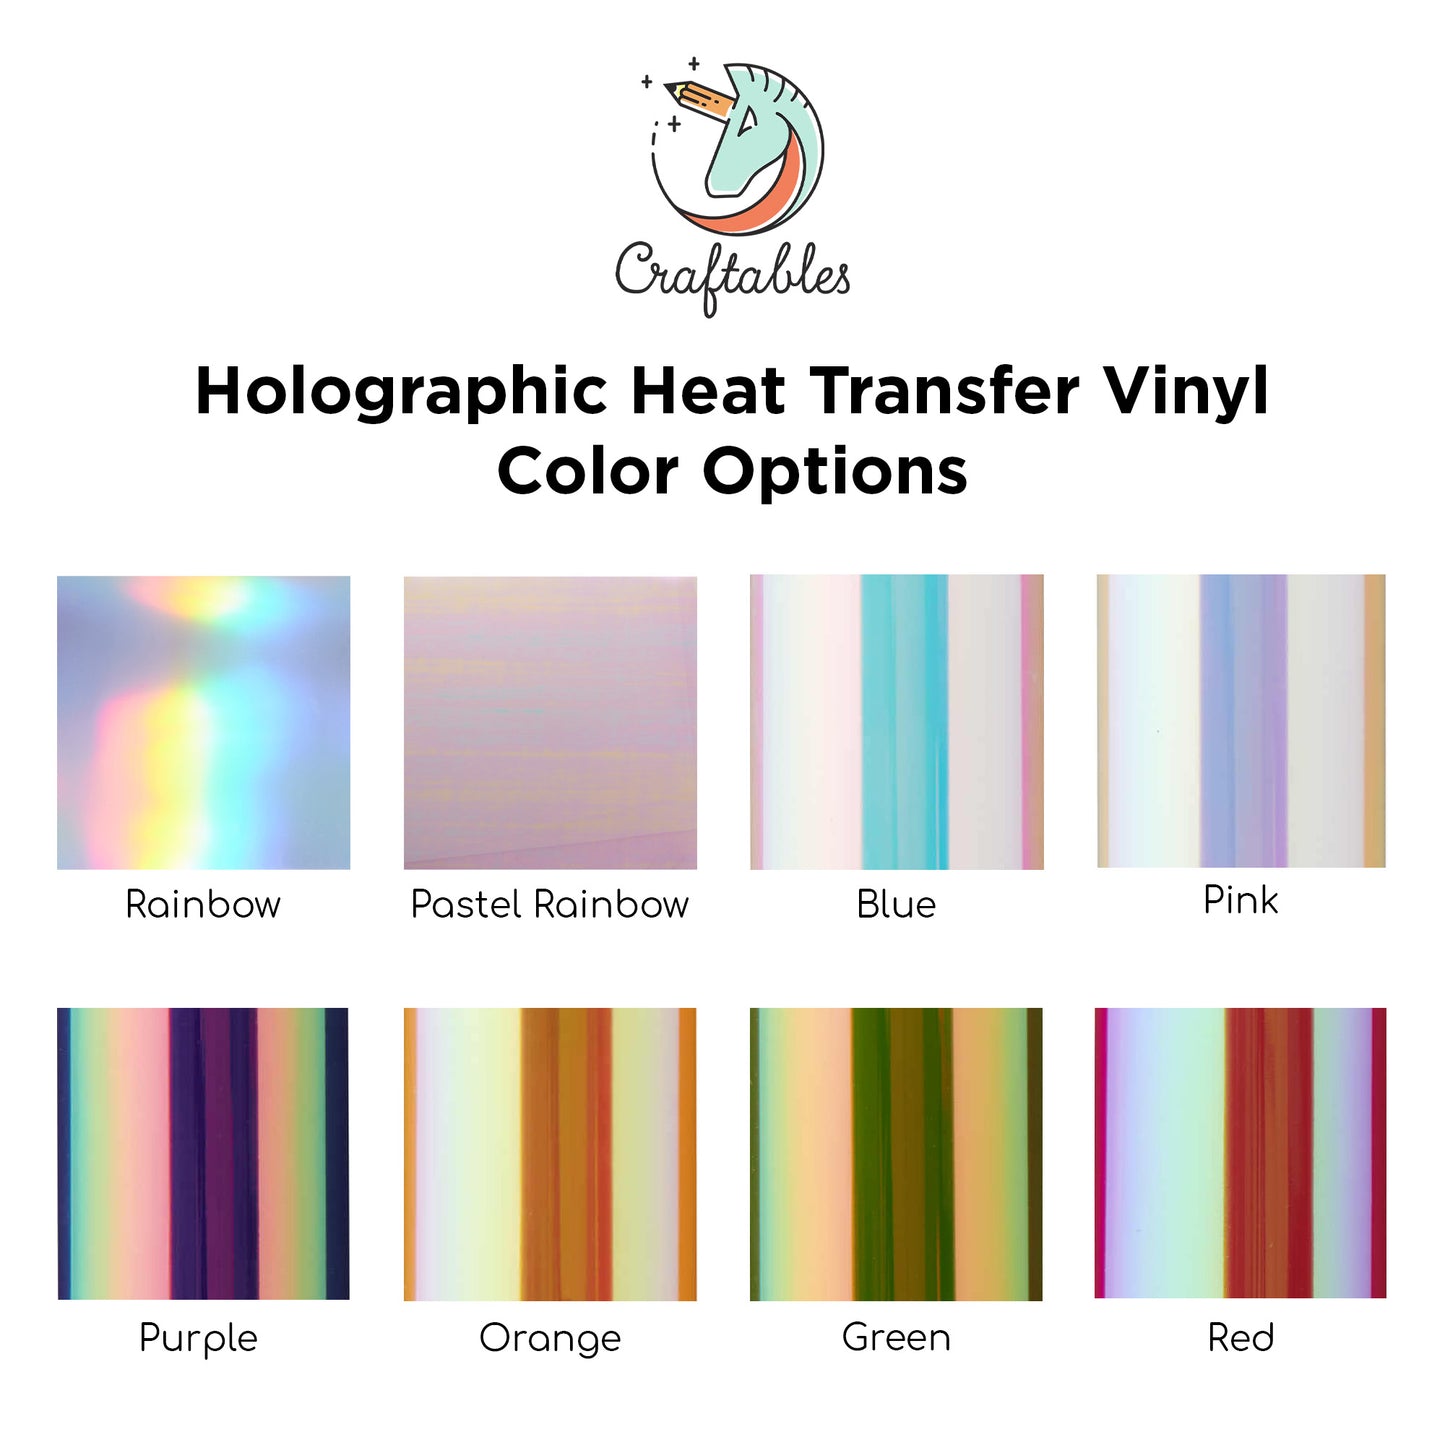 Blue Holographic Heat Transfer Vinyl Rolls By Craftables